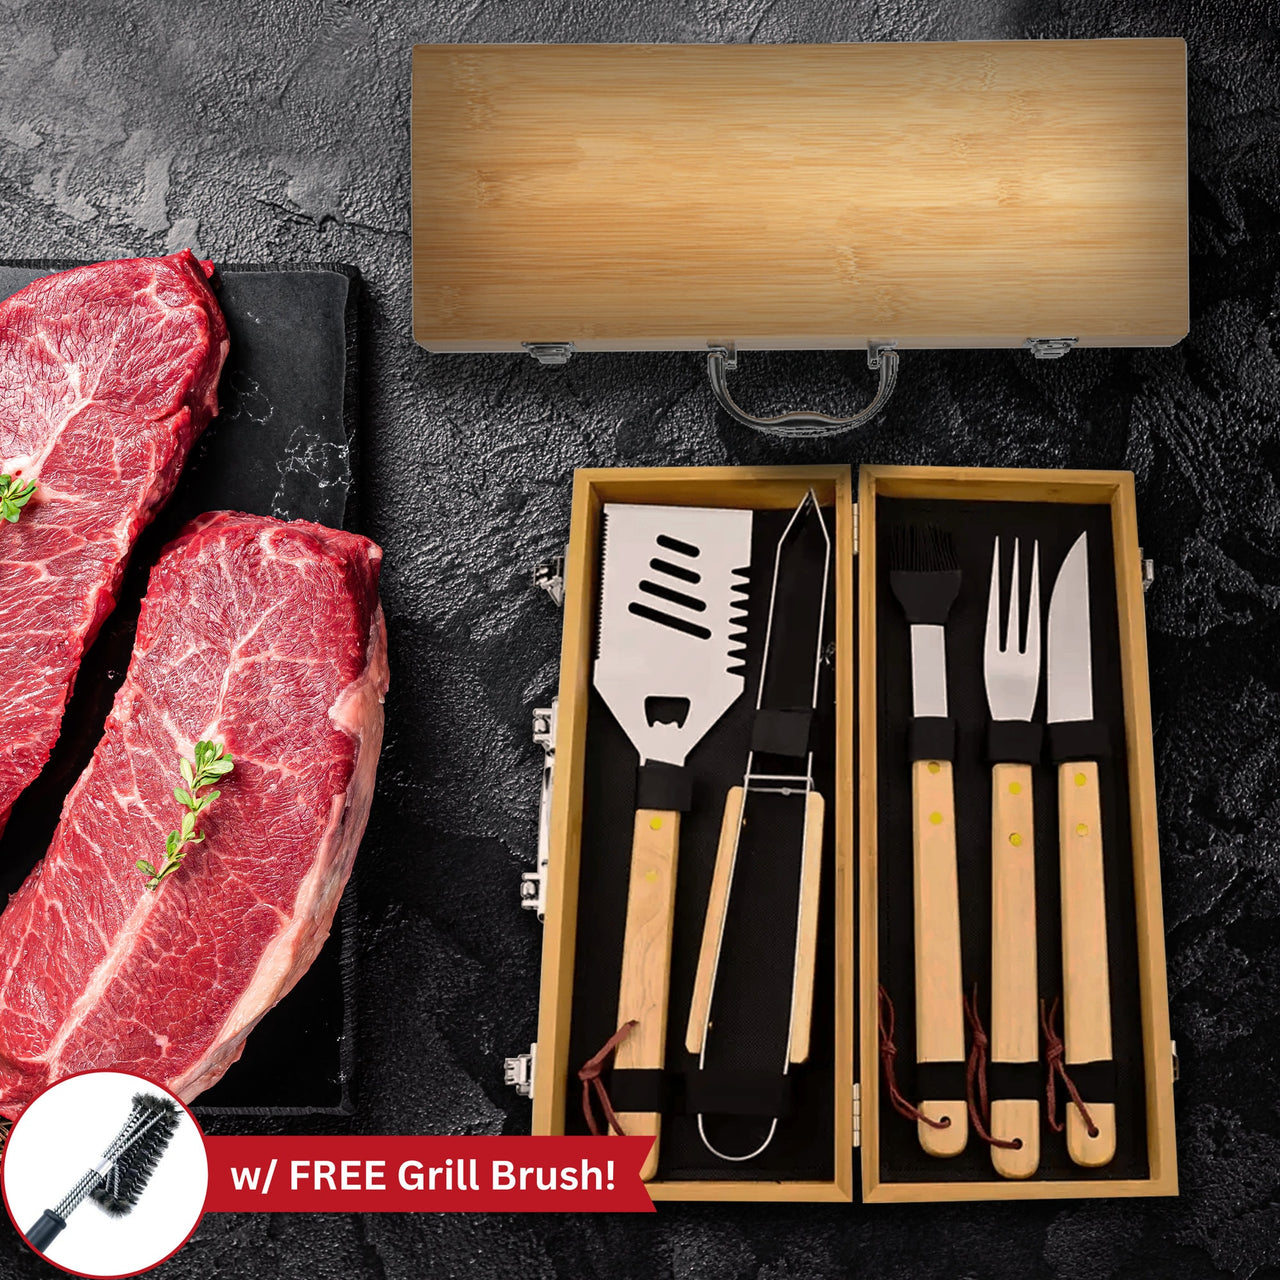 Personalized 5-Piece Grillmaster Gift Set for Dad: Custom BBQ Tools with Free Grill Brush